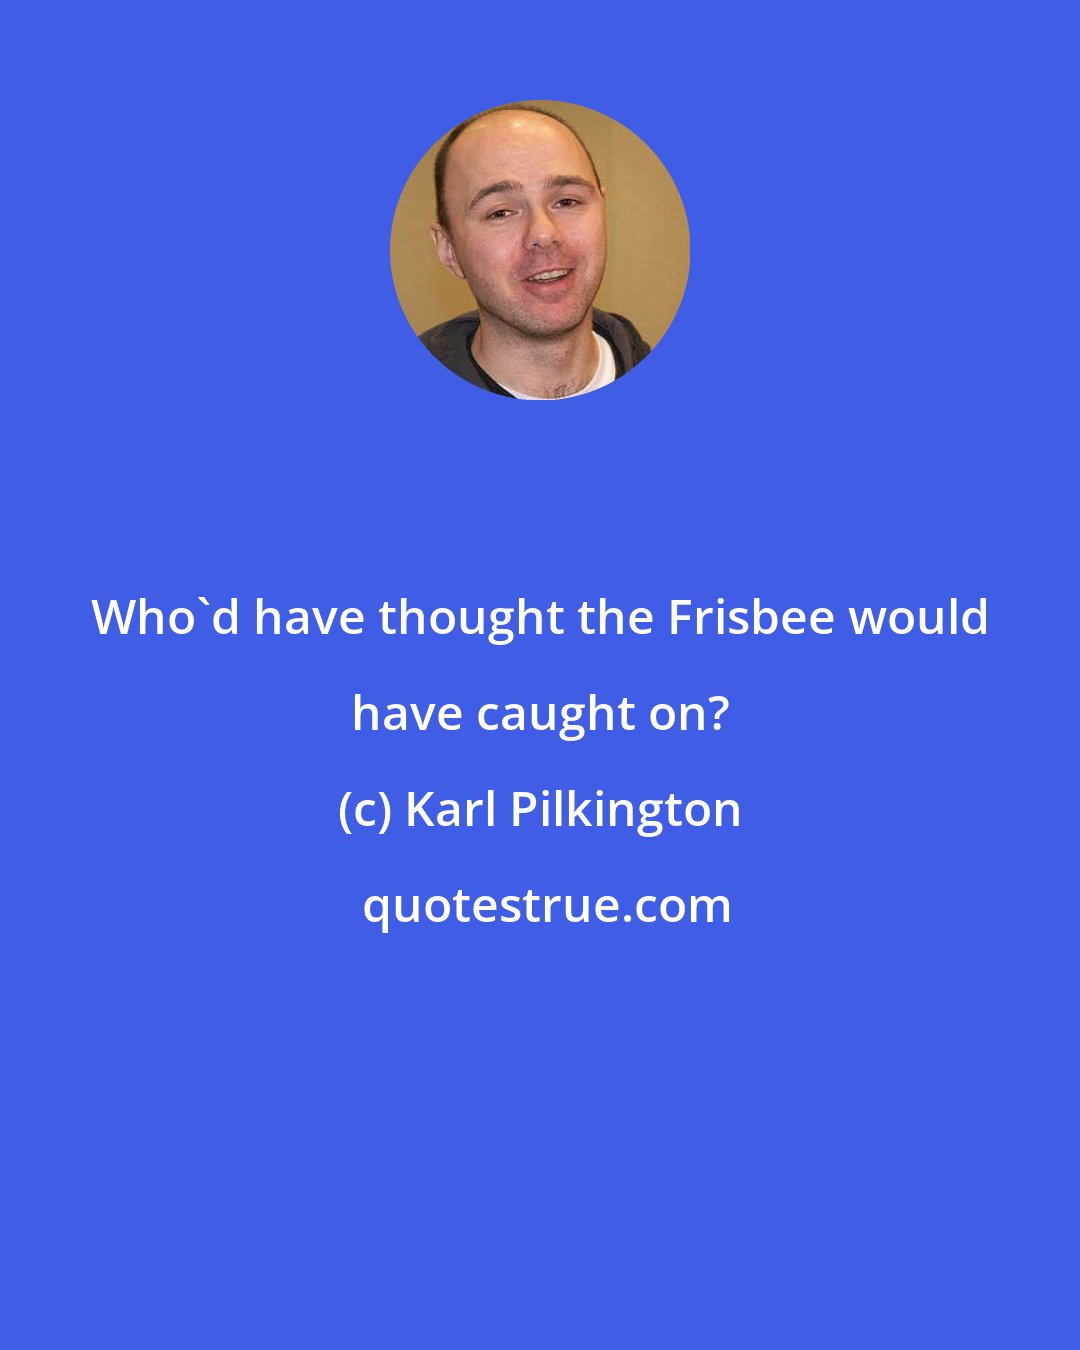 Karl Pilkington: Who'd have thought the Frisbee would have caught on?